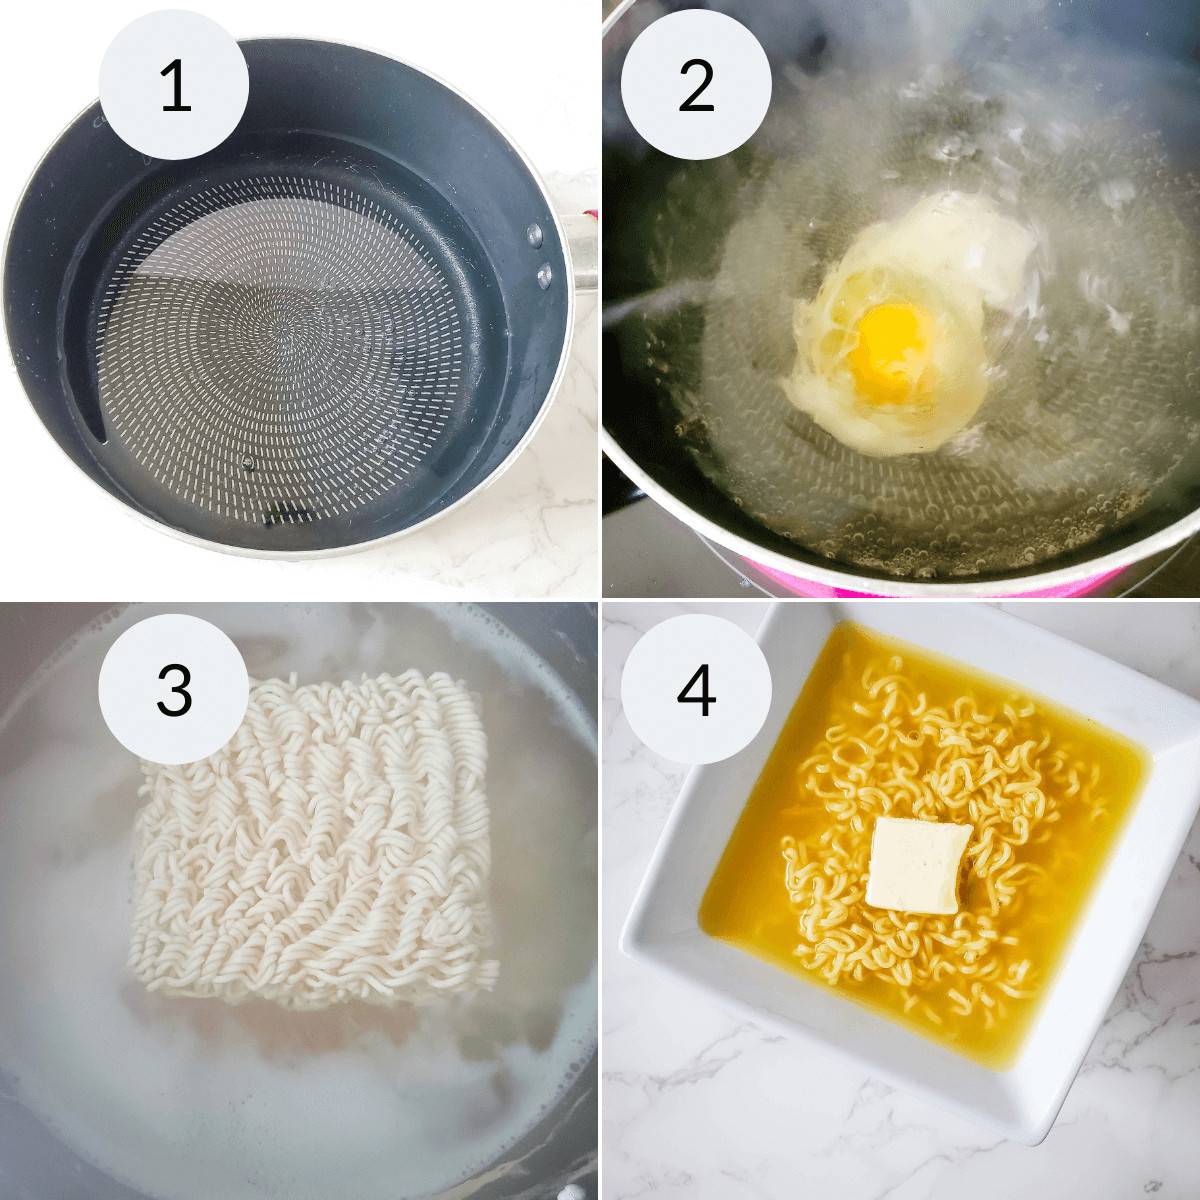 Pictures demonstrating the process of making noodles.